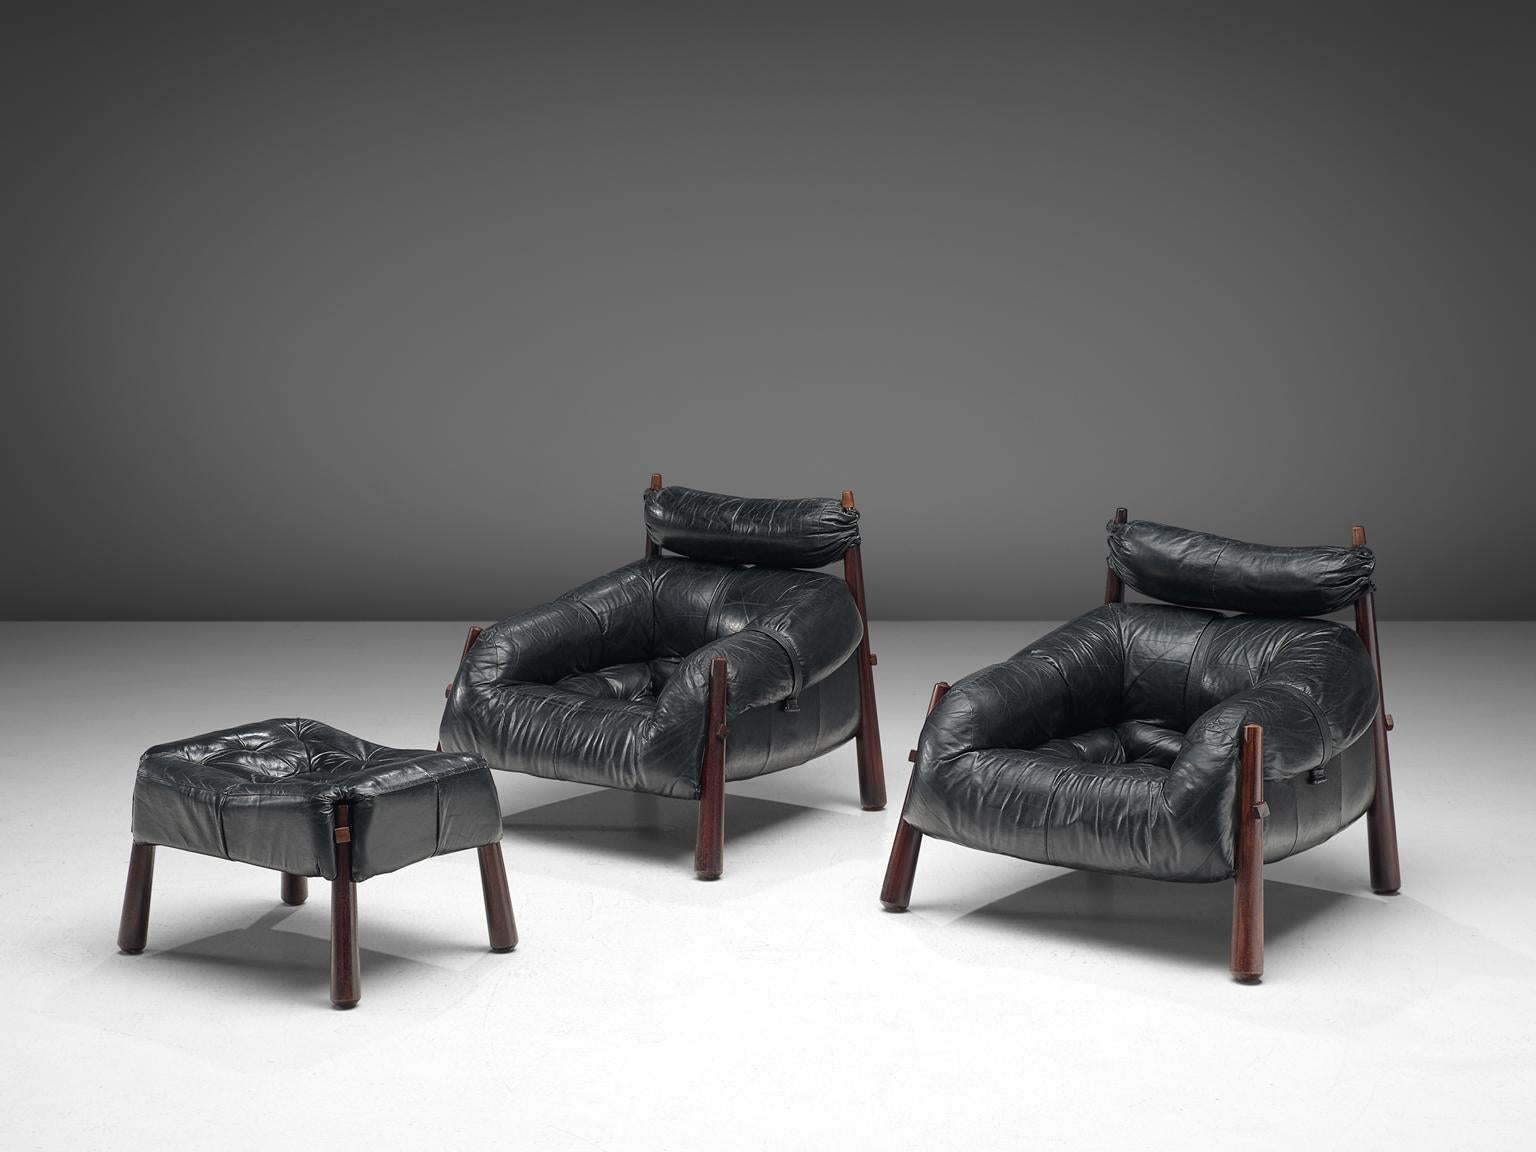 Percival Lafer, set of 2 lounge chairs with ottoman model MP-81, in rosewood and leather, Brazil, 1972.

Beautiful set of lounge chairs by Brazilian designer Percival Lafer. These chairs consist of a solid dark wooden base to which the leather